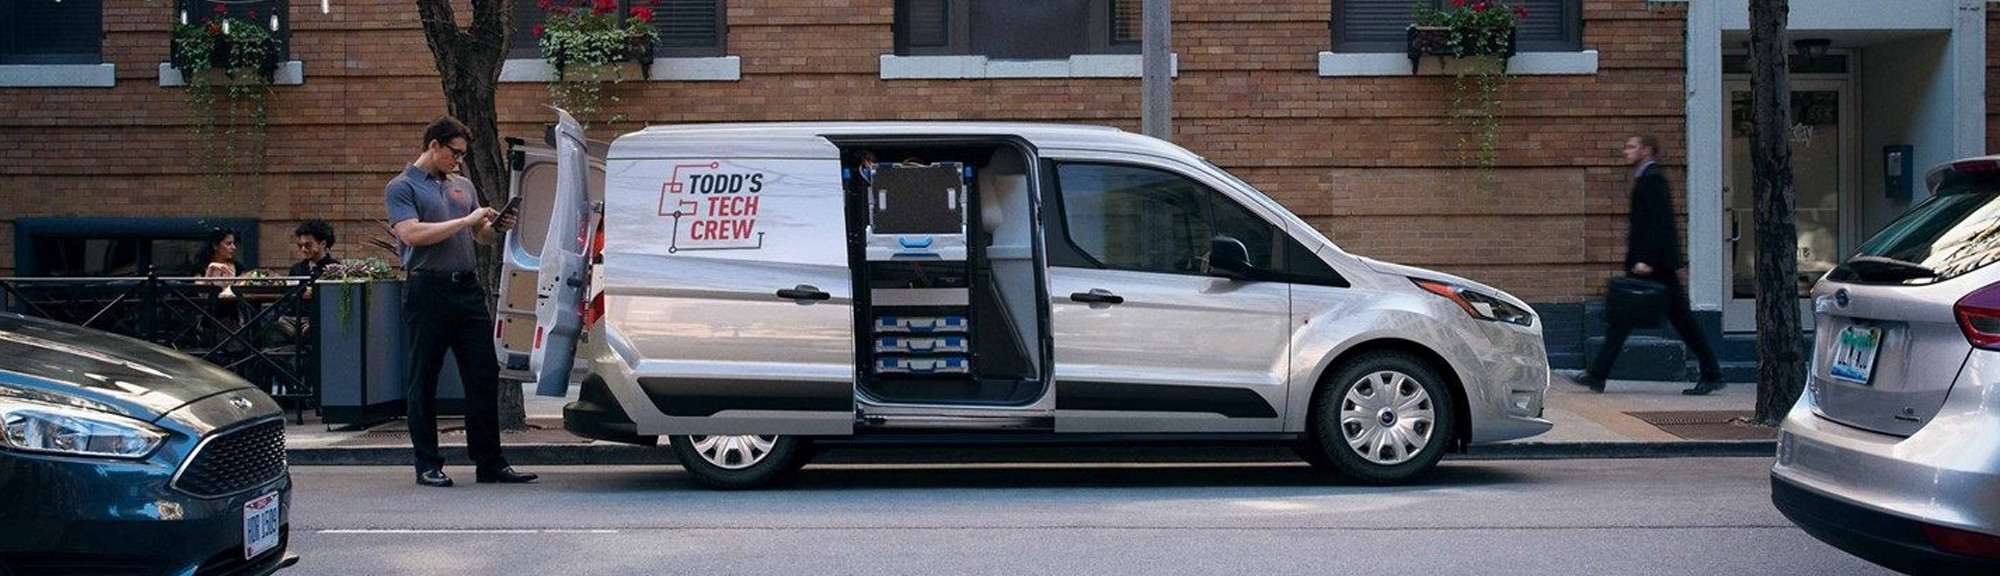 2019 Ford Transit Connect Denton Ford My Local Ford